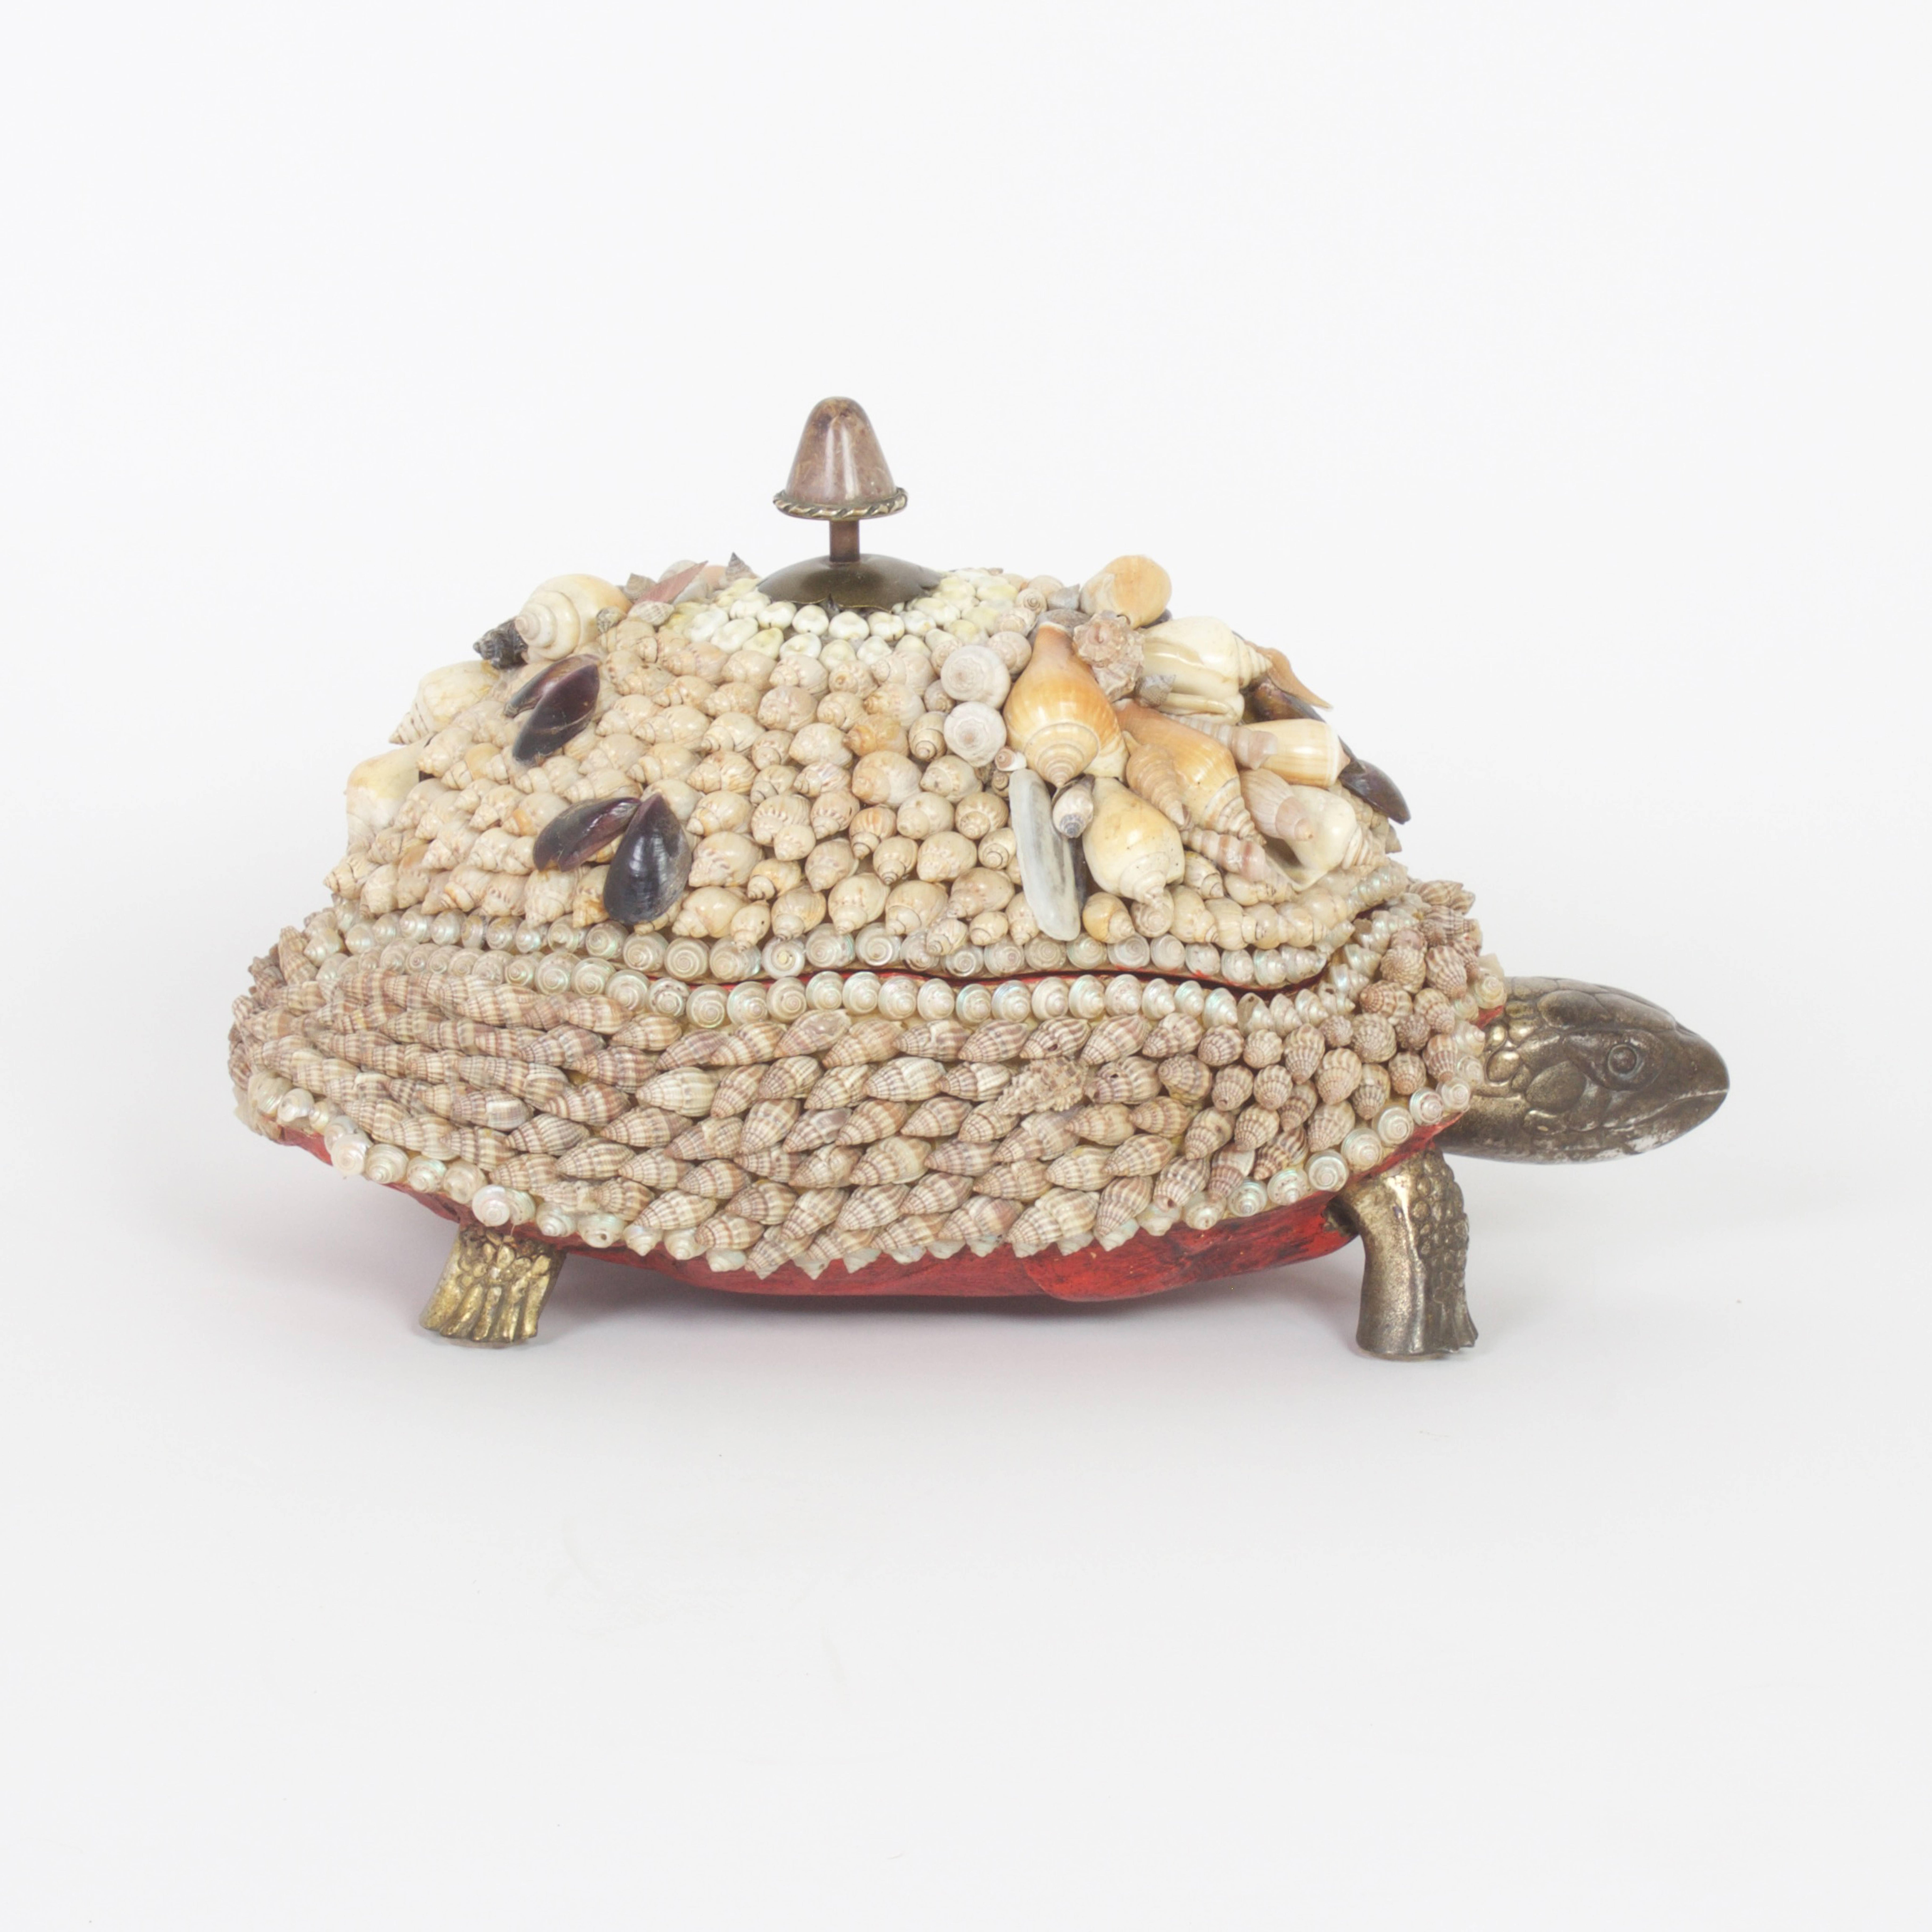 Here we present a turtle that is a sculpture and a box or perhaps service piece, with an outrageous mix of materials and textures by Anthony Redmile. The turtle head and legs are bronzed metal set in a composition body encrusted with sea shells and